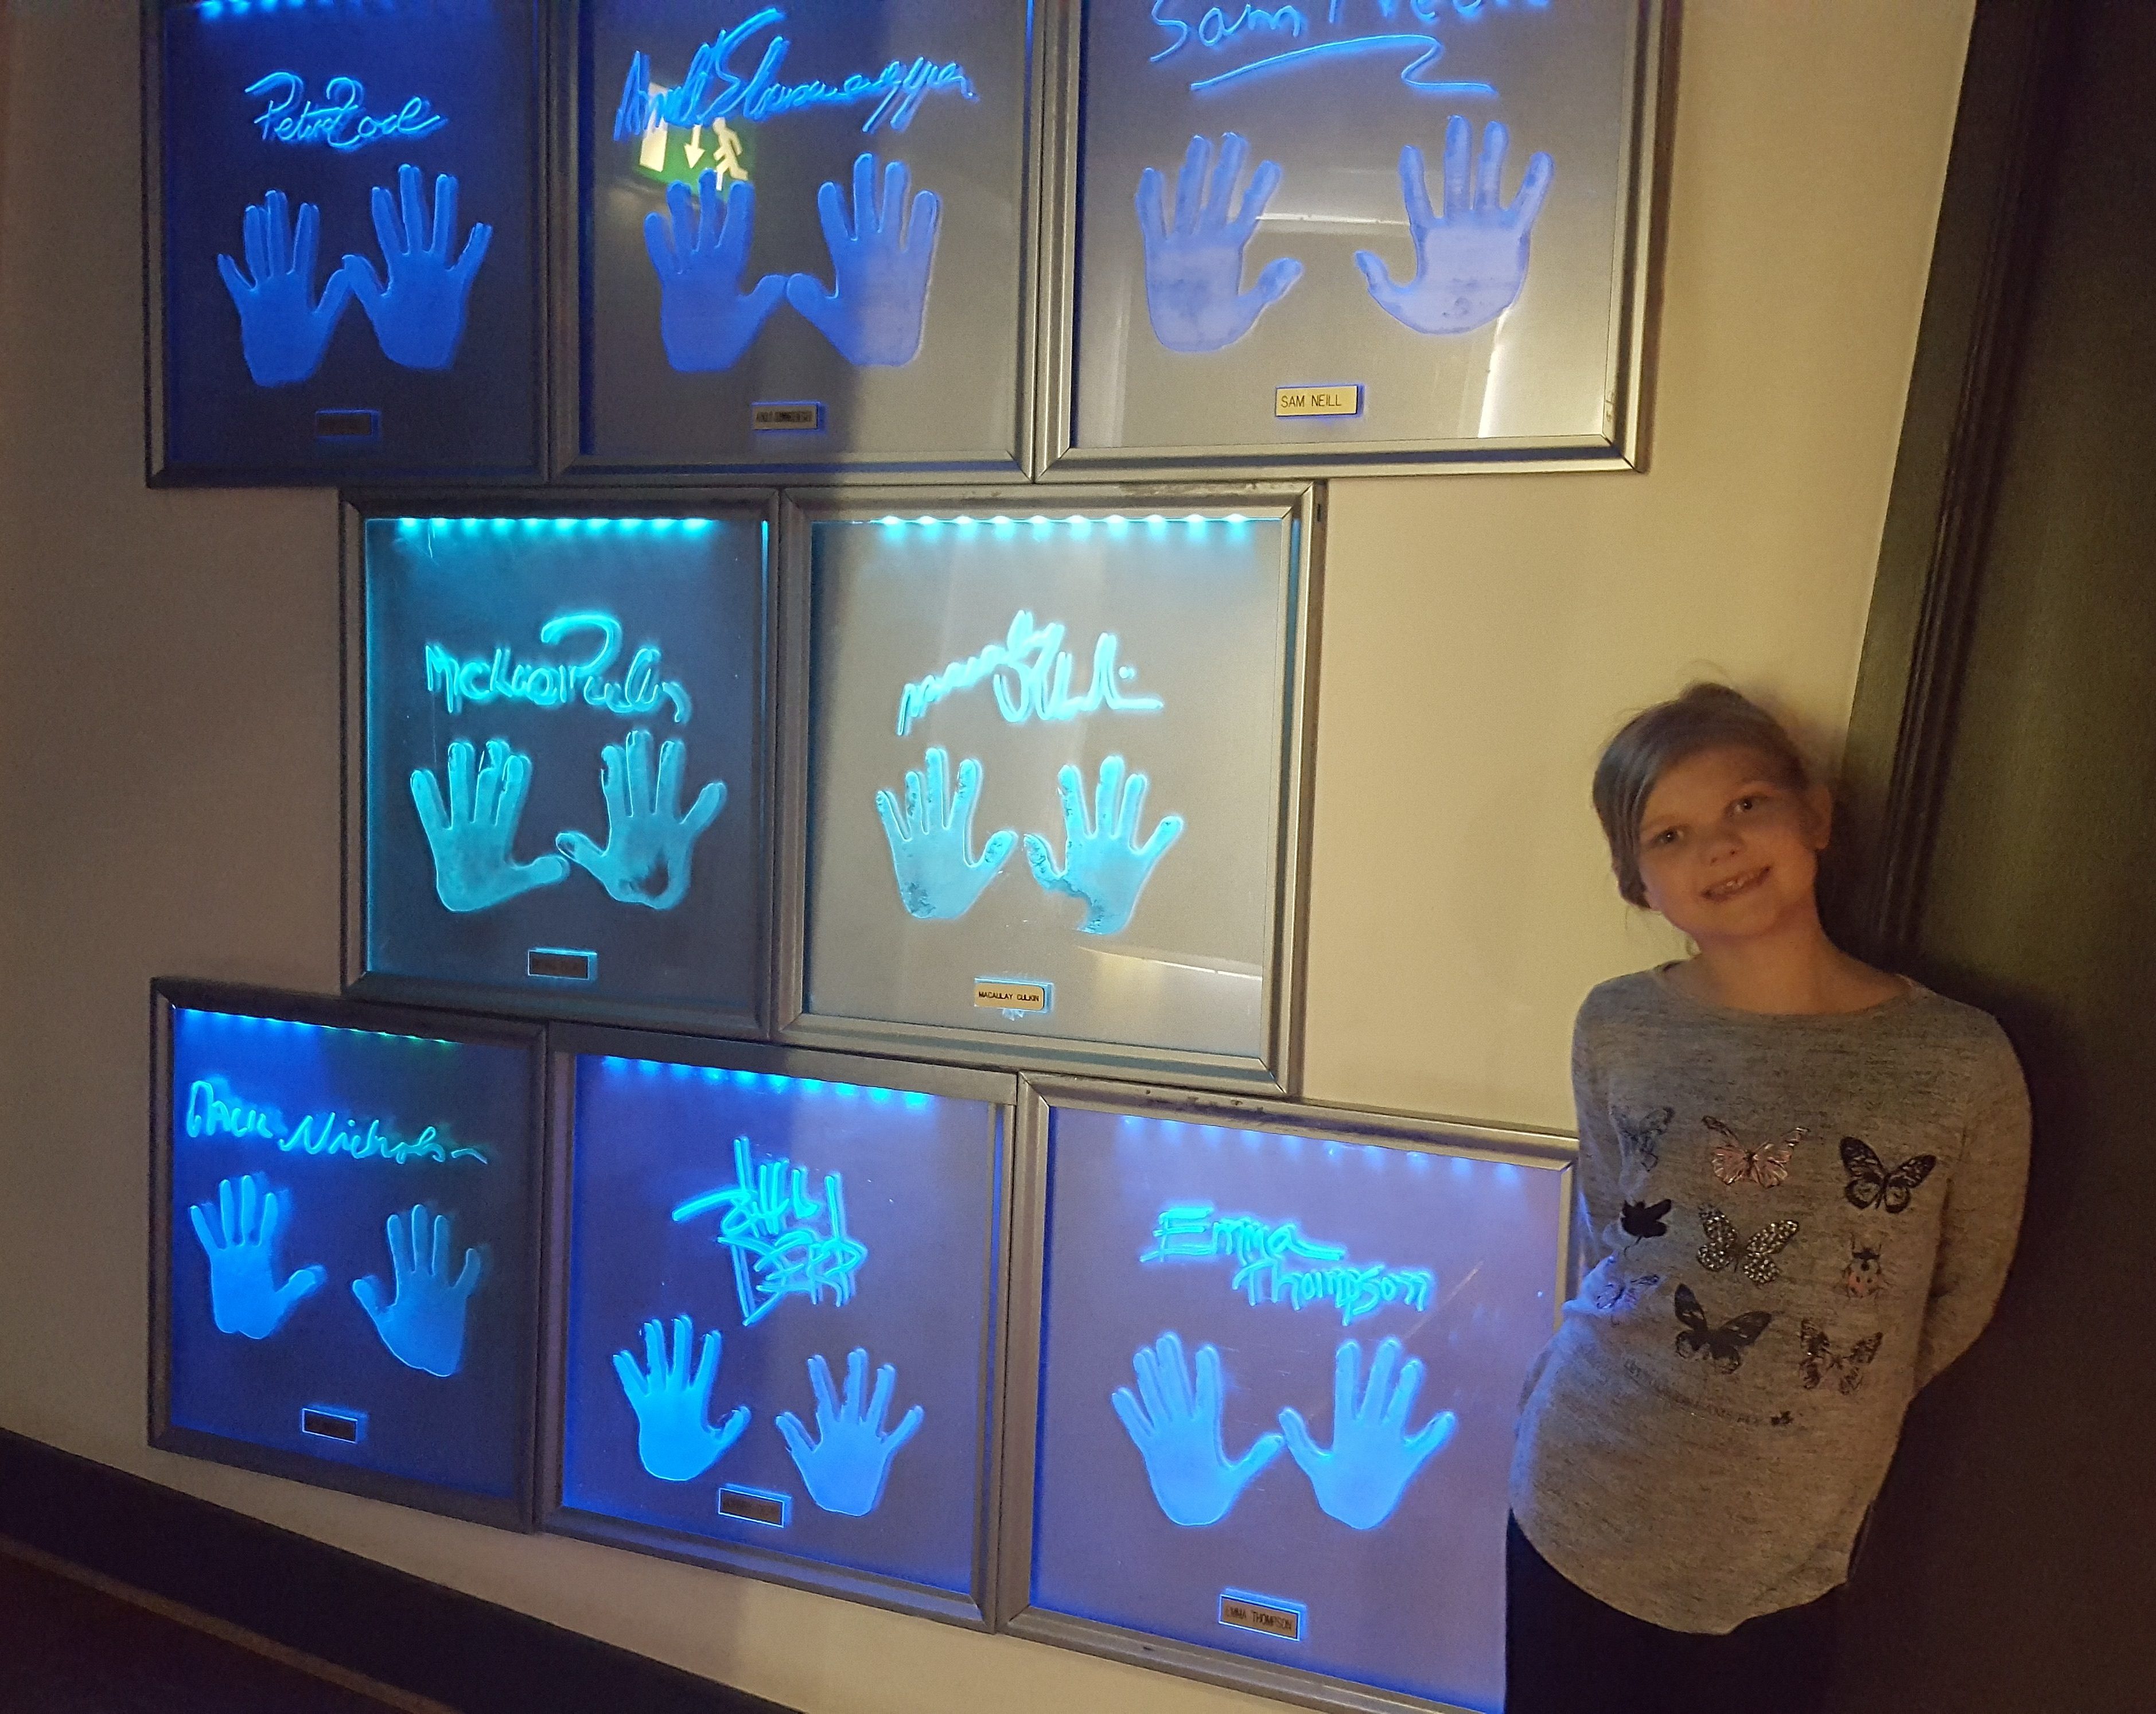 Planet Hollywood Wall of Famous Handprints